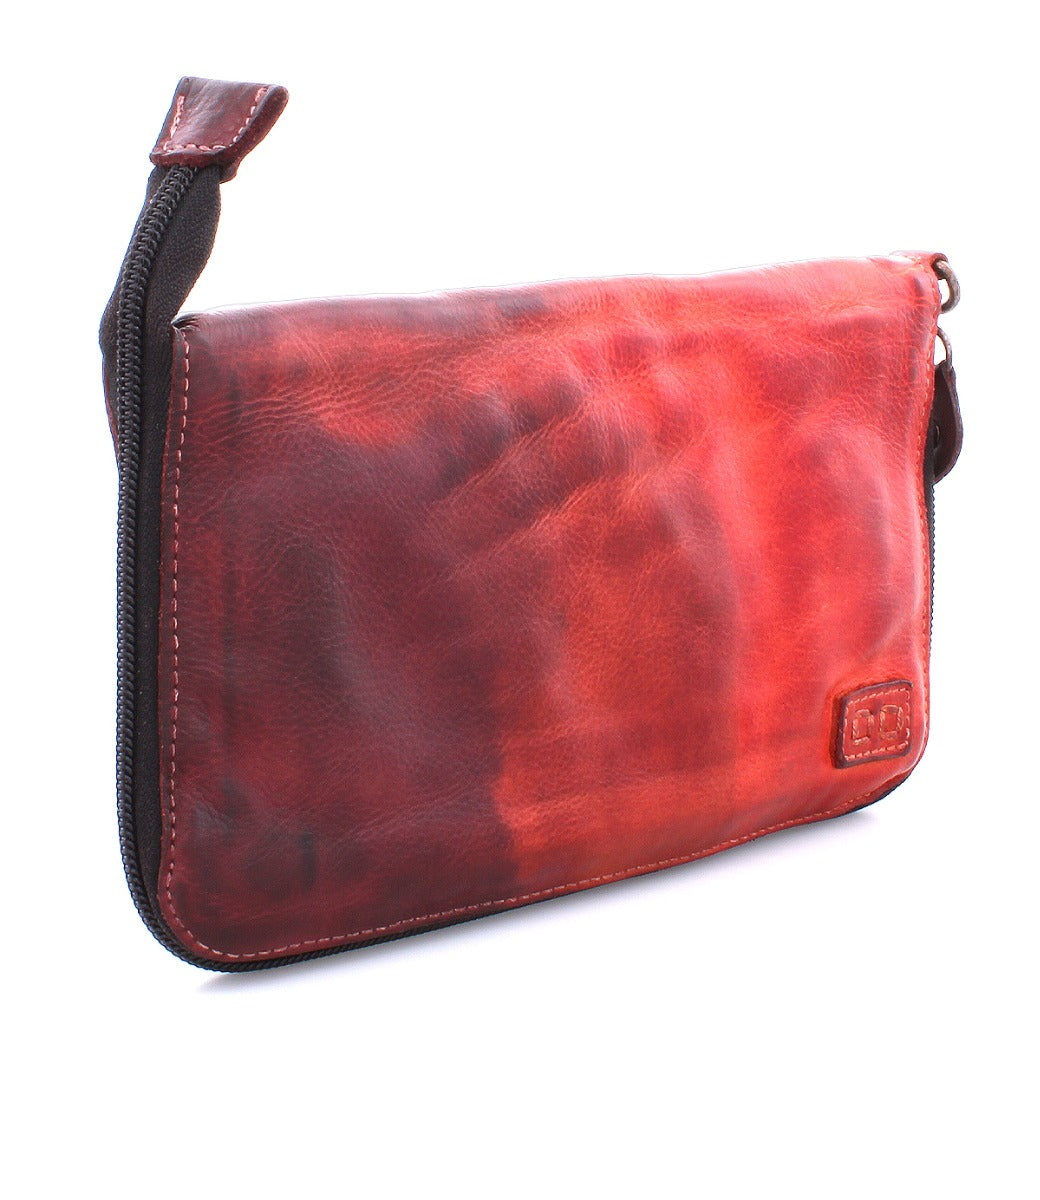 Bed Stu Templeton II red leather multi-functional leather clutch.